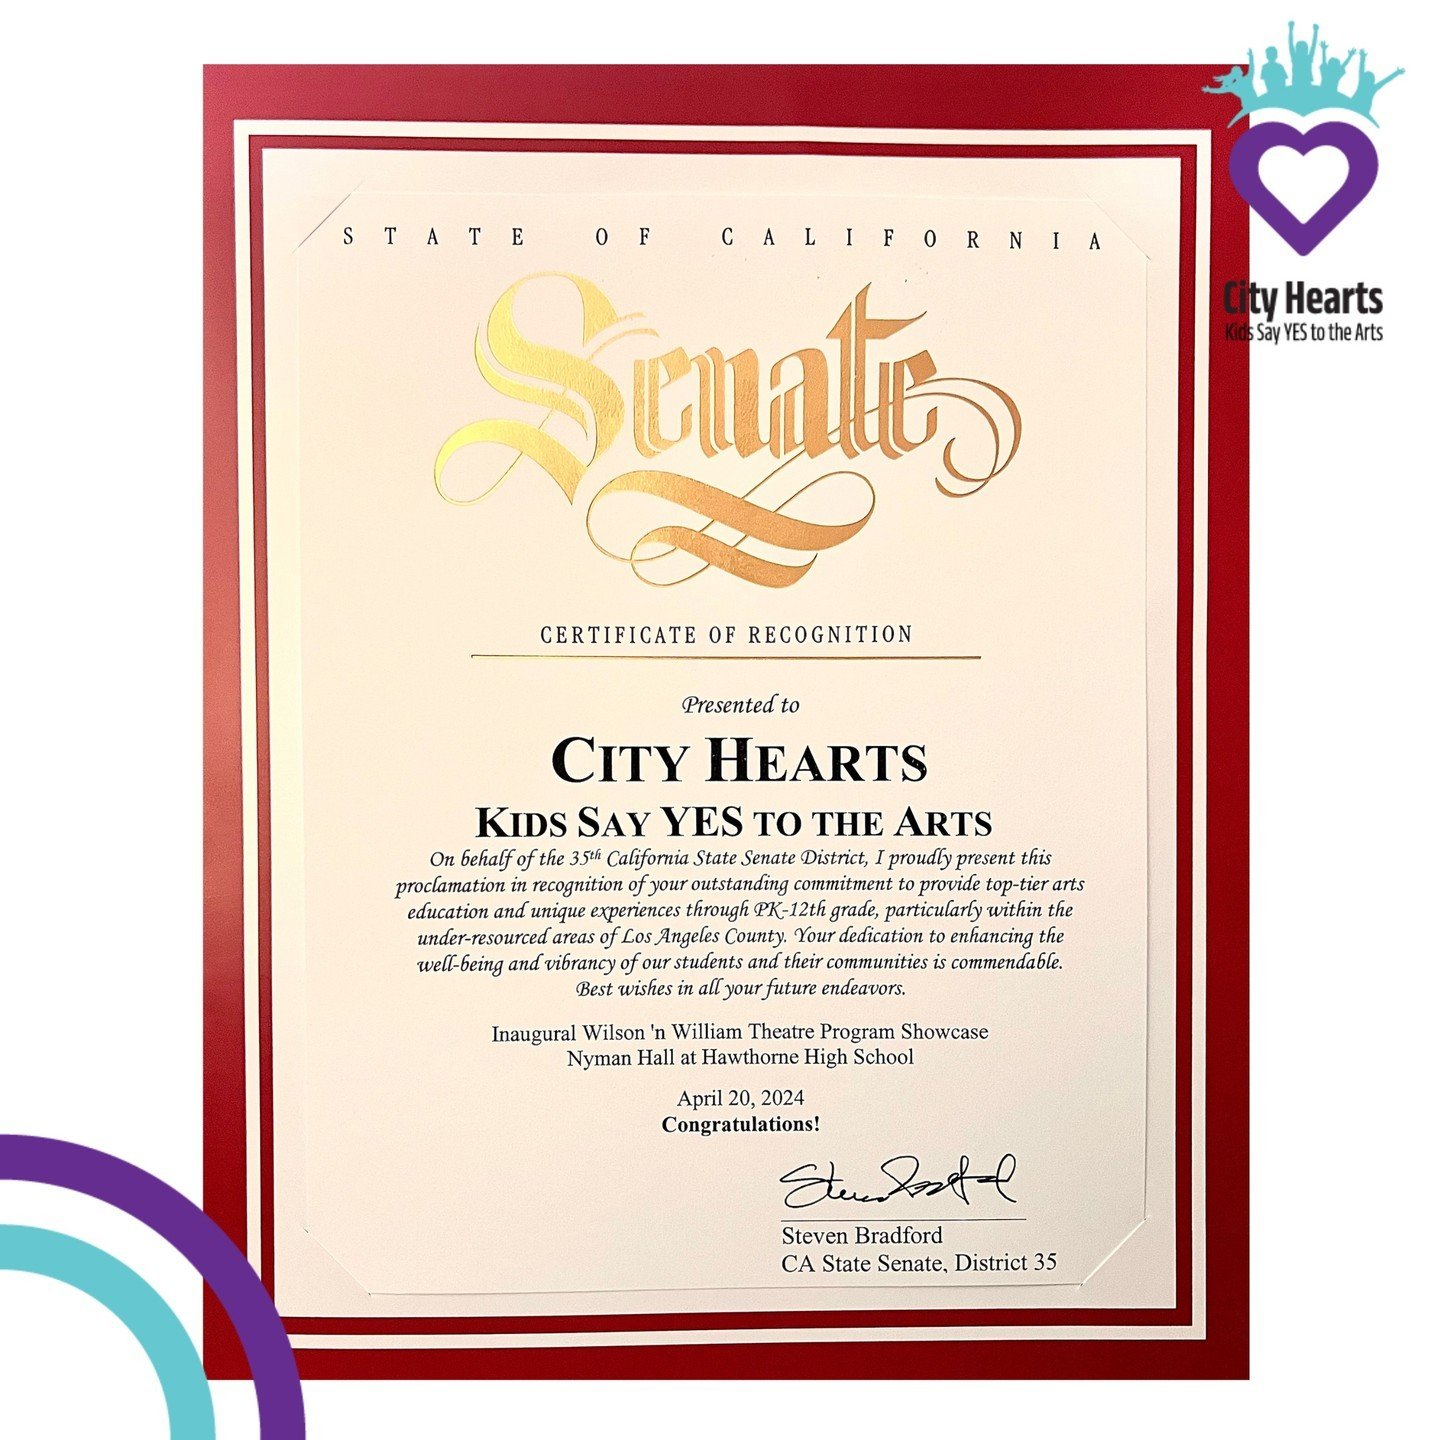 City Hearts is deeply moved and appreciative to receive this certificate of recognition which reads:

&quot;On behalf of the 35th California State Senate District, I proudly present this proclamation in recognition of your outstanding commitment  to 